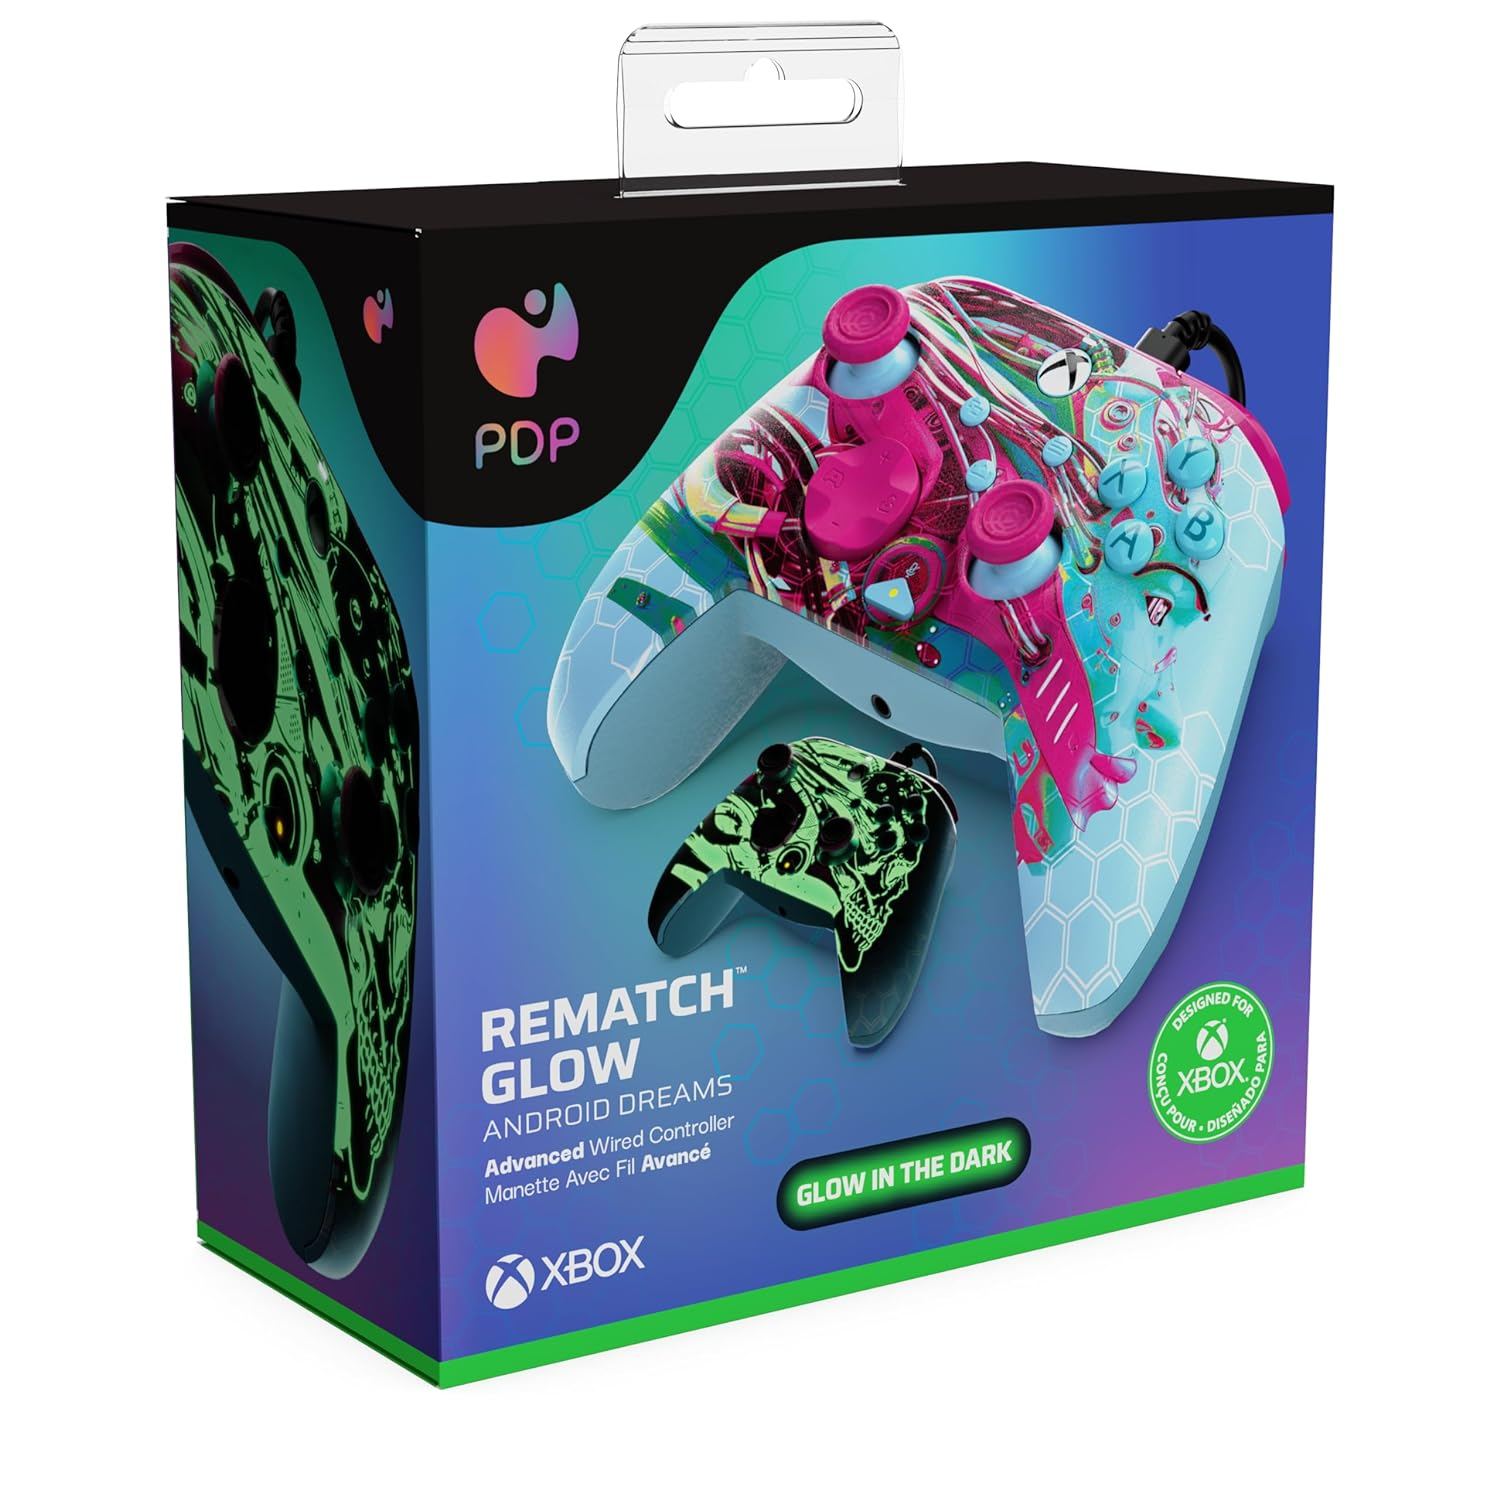 PDP Rematch Glow Advanced Wired Controller for Xbox One / Xbox